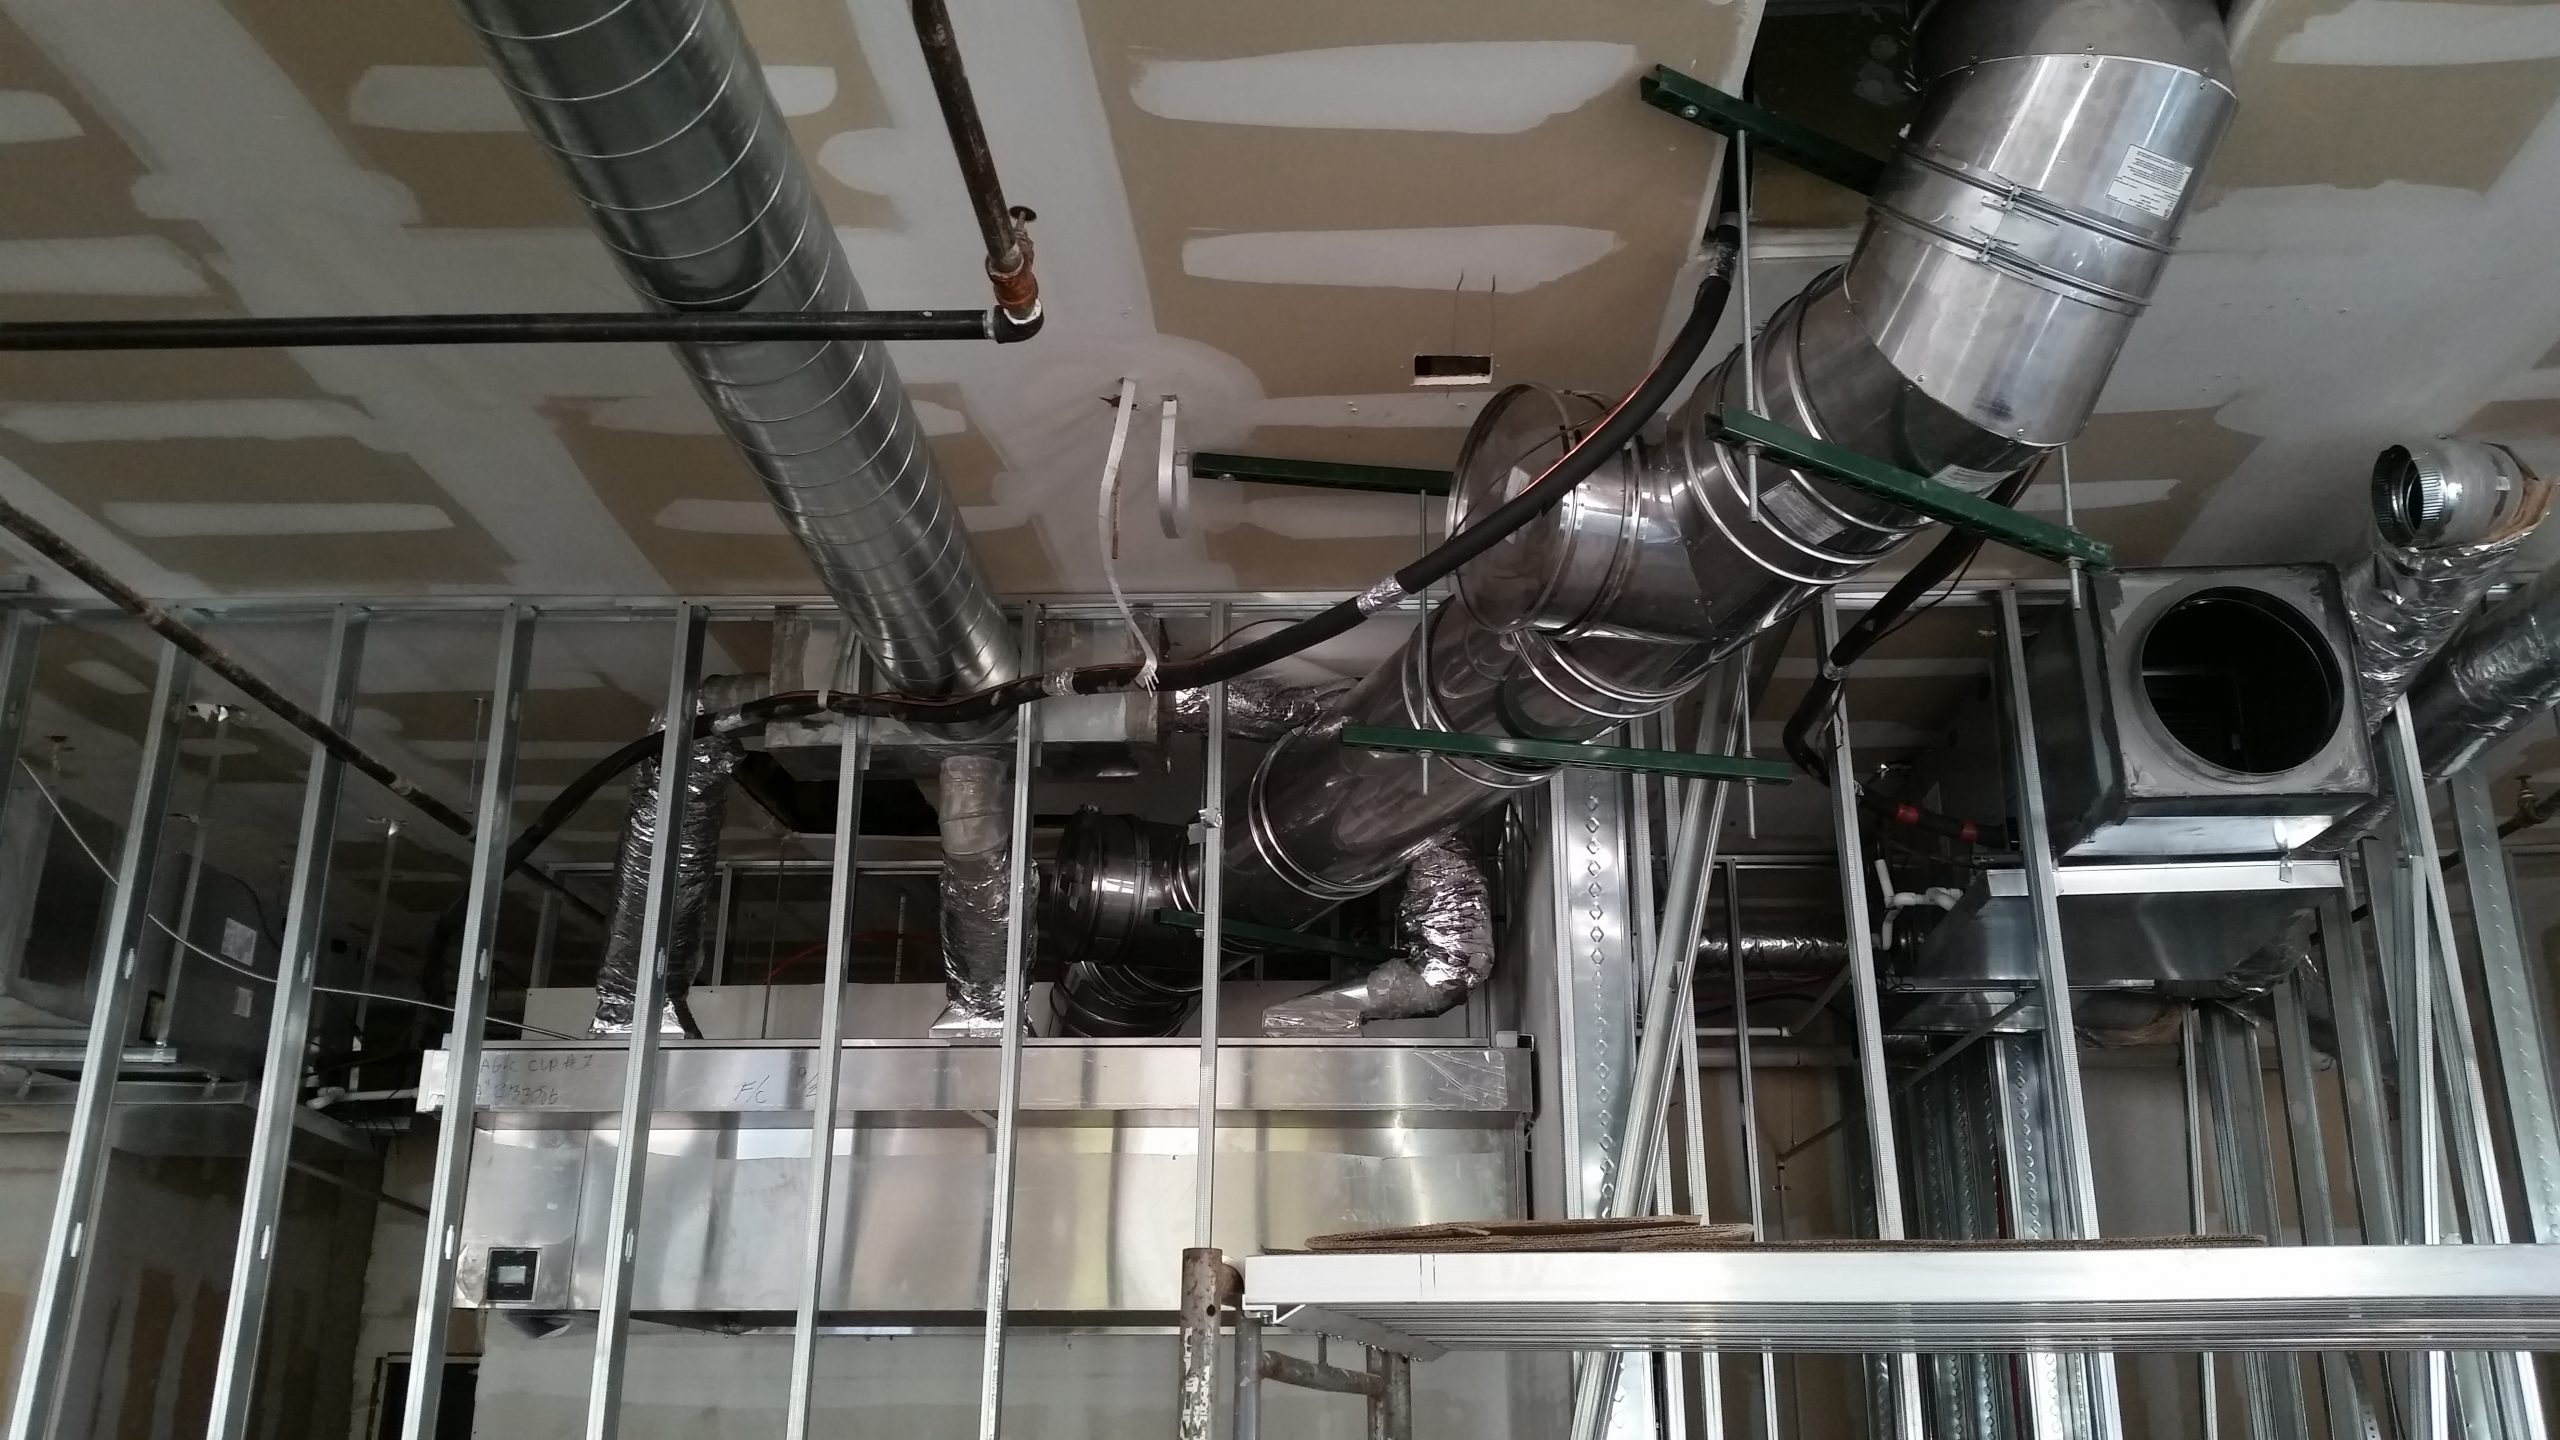 Vent Tech Commercial Hoods Grease Duct And Mua Duct with dimensions 5312 X 2988